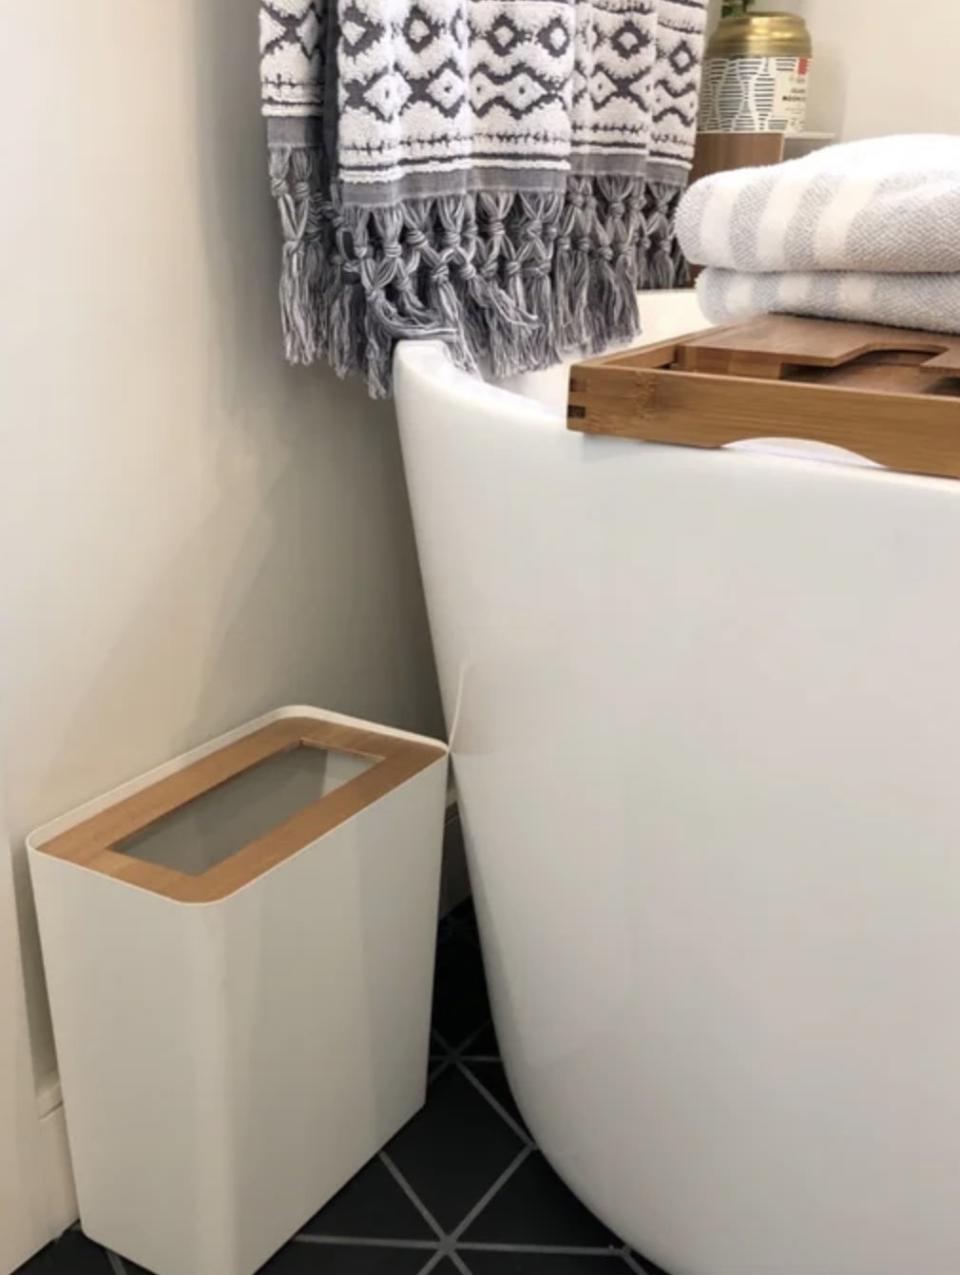 A reviewer's bathroom trash can